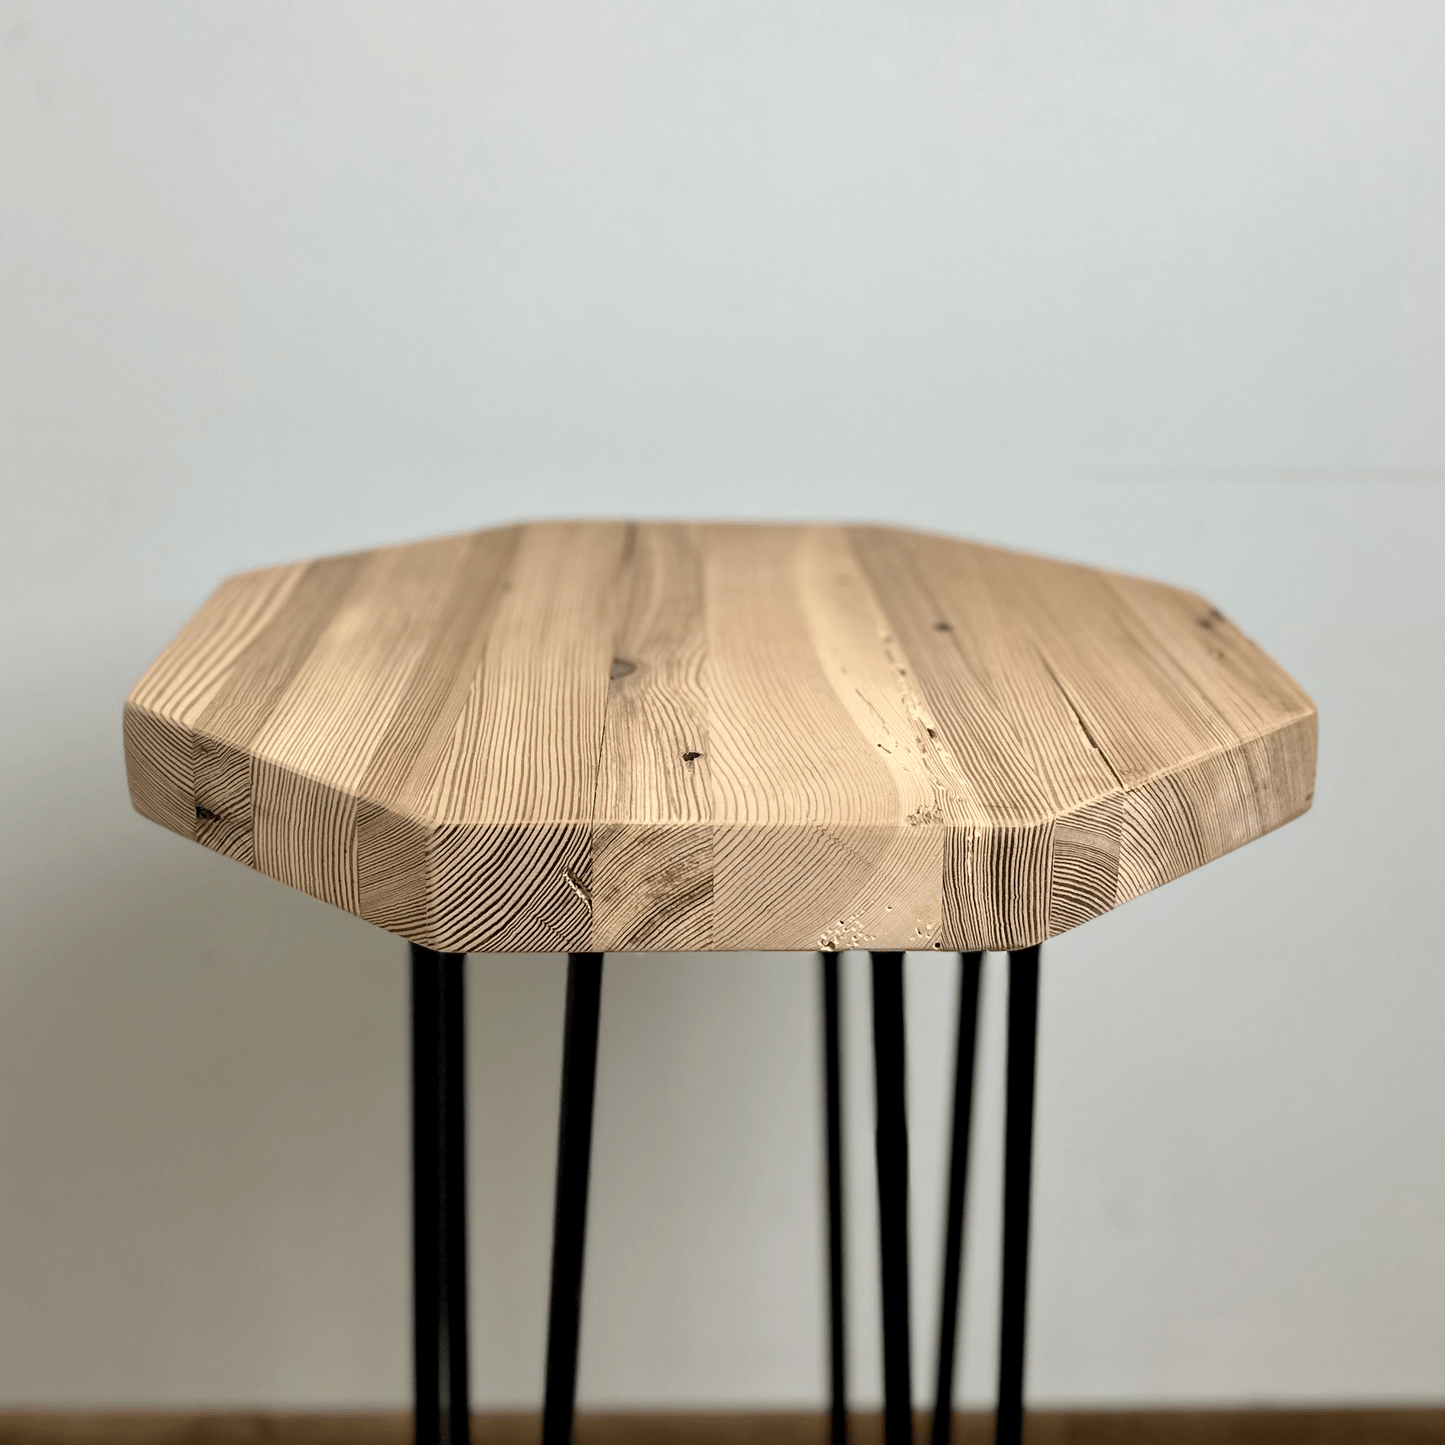 a reclaimed wood table in an octagonal shape and unfinished finish. The table is supported by four hairpin legs. Grain patterns and color variations in the wood are shown.